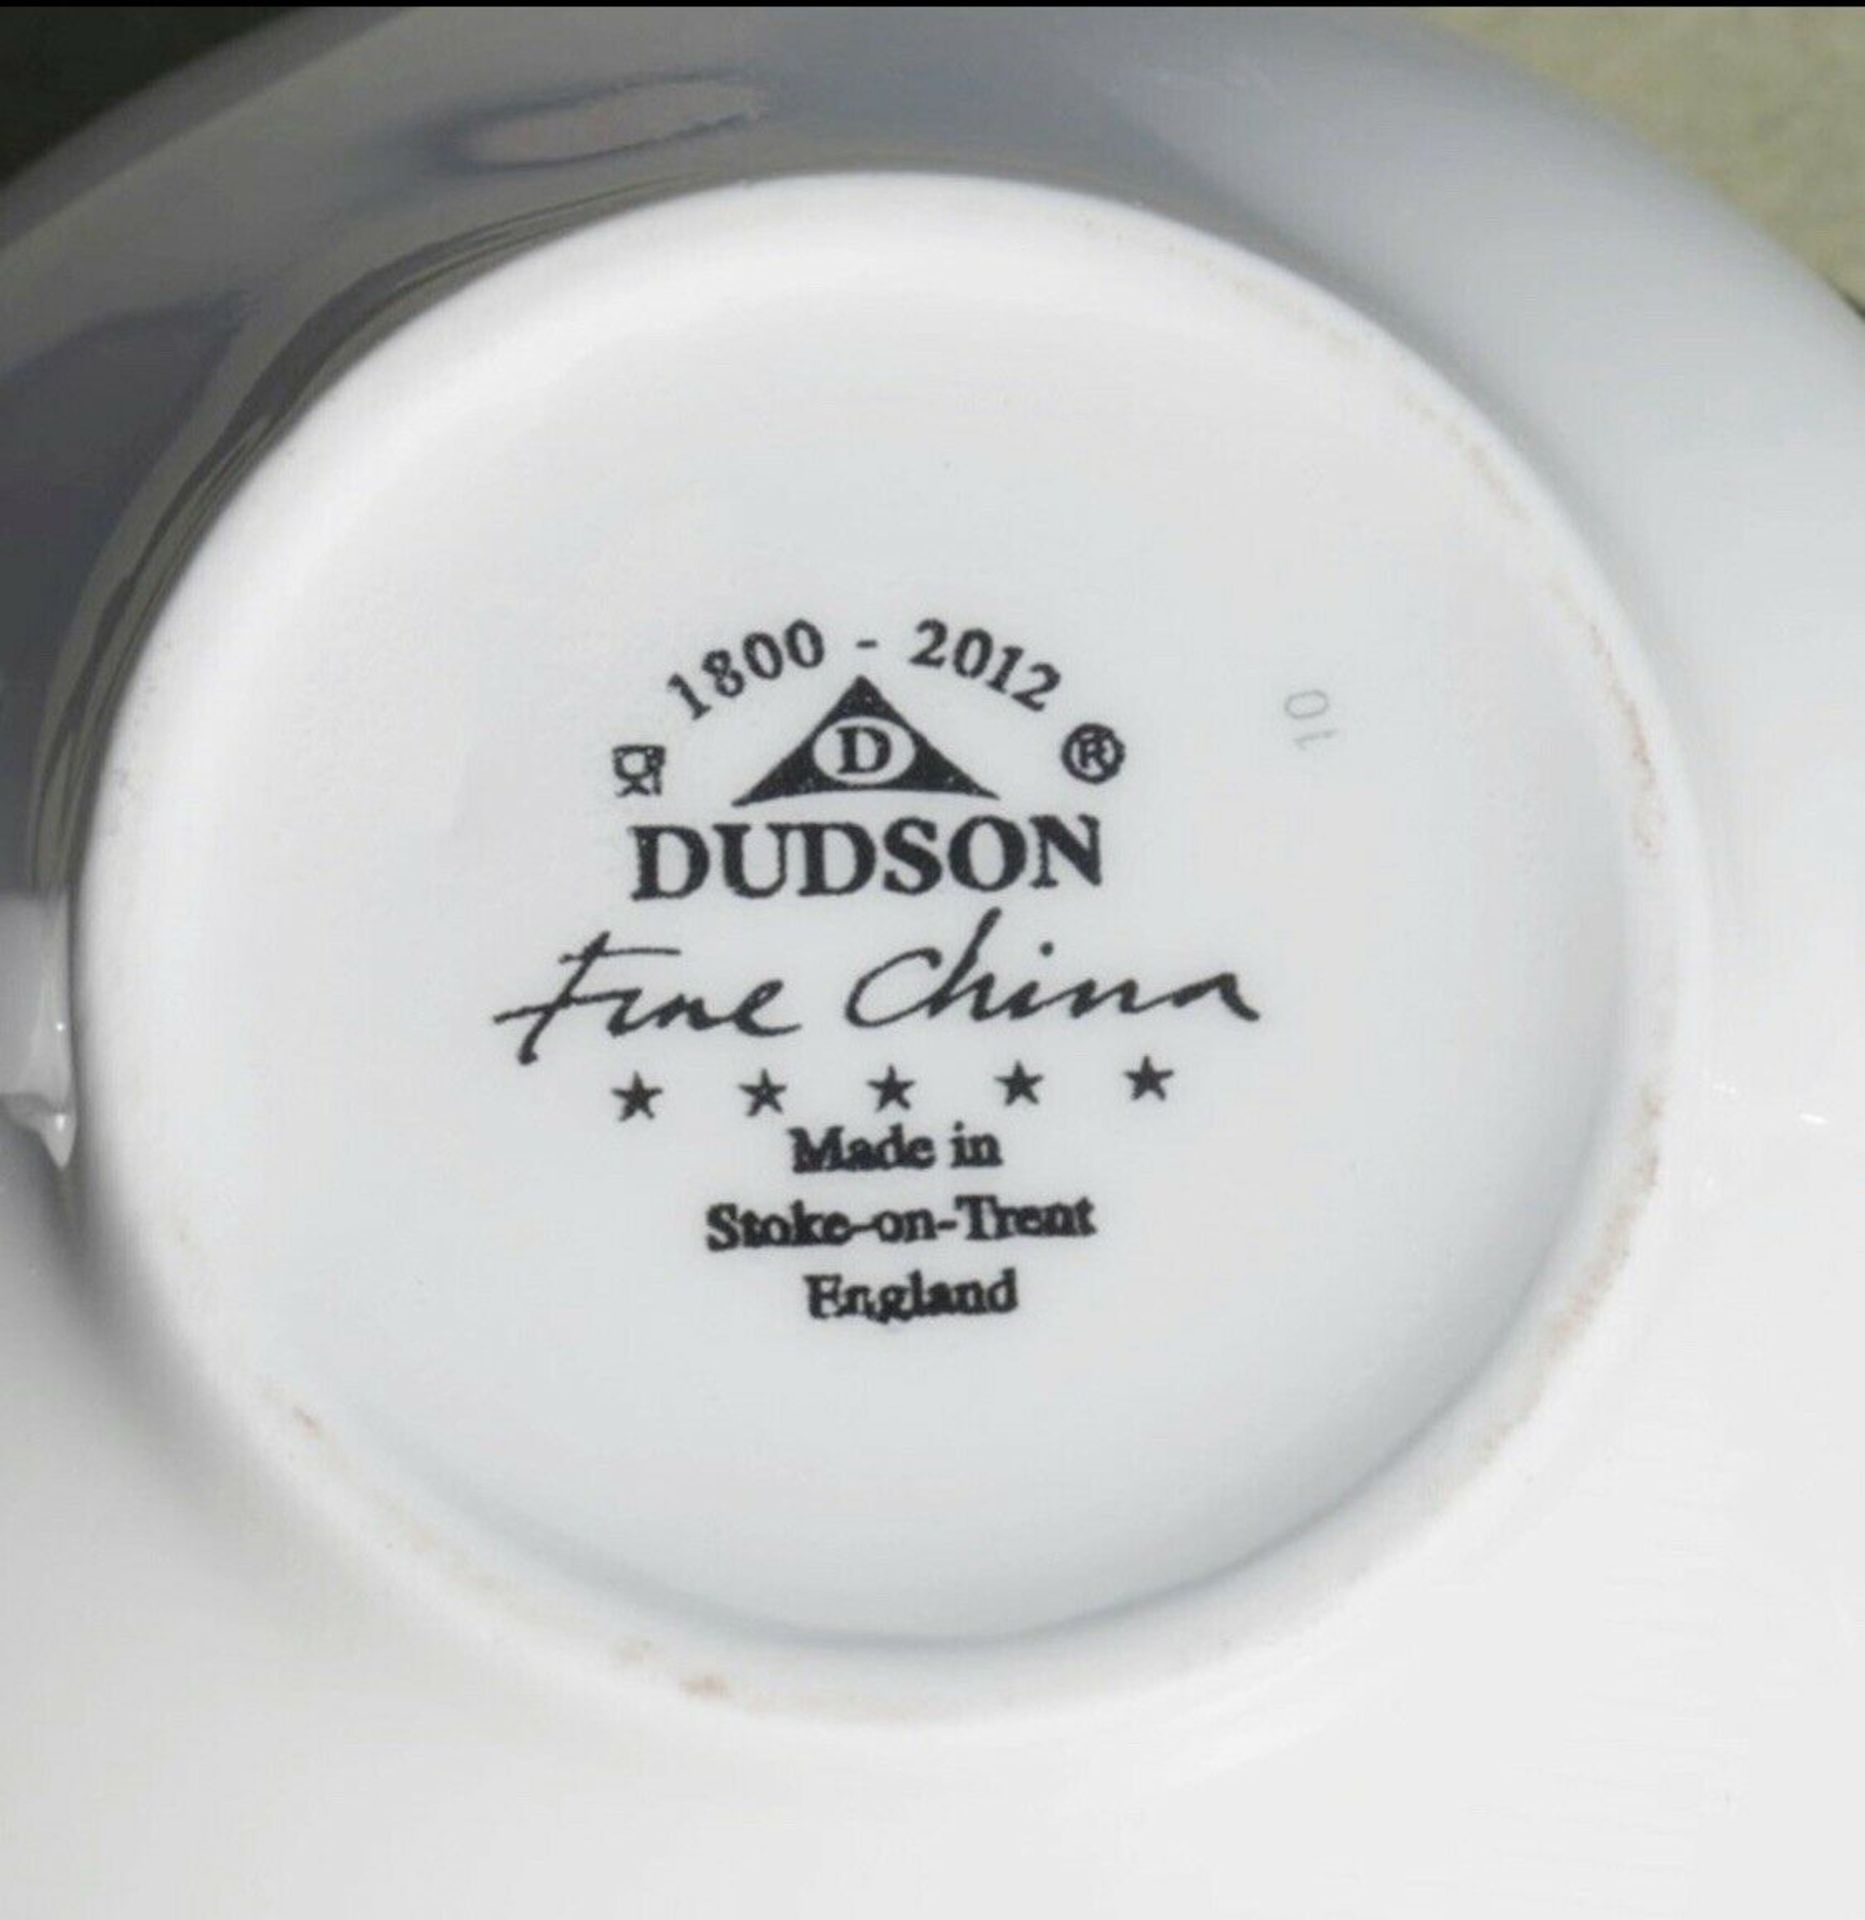 18 x  DUDSON Fine China 'Georgian' Soup Cups with â€˜Famous Branding' - NEW - Image 6 of 6